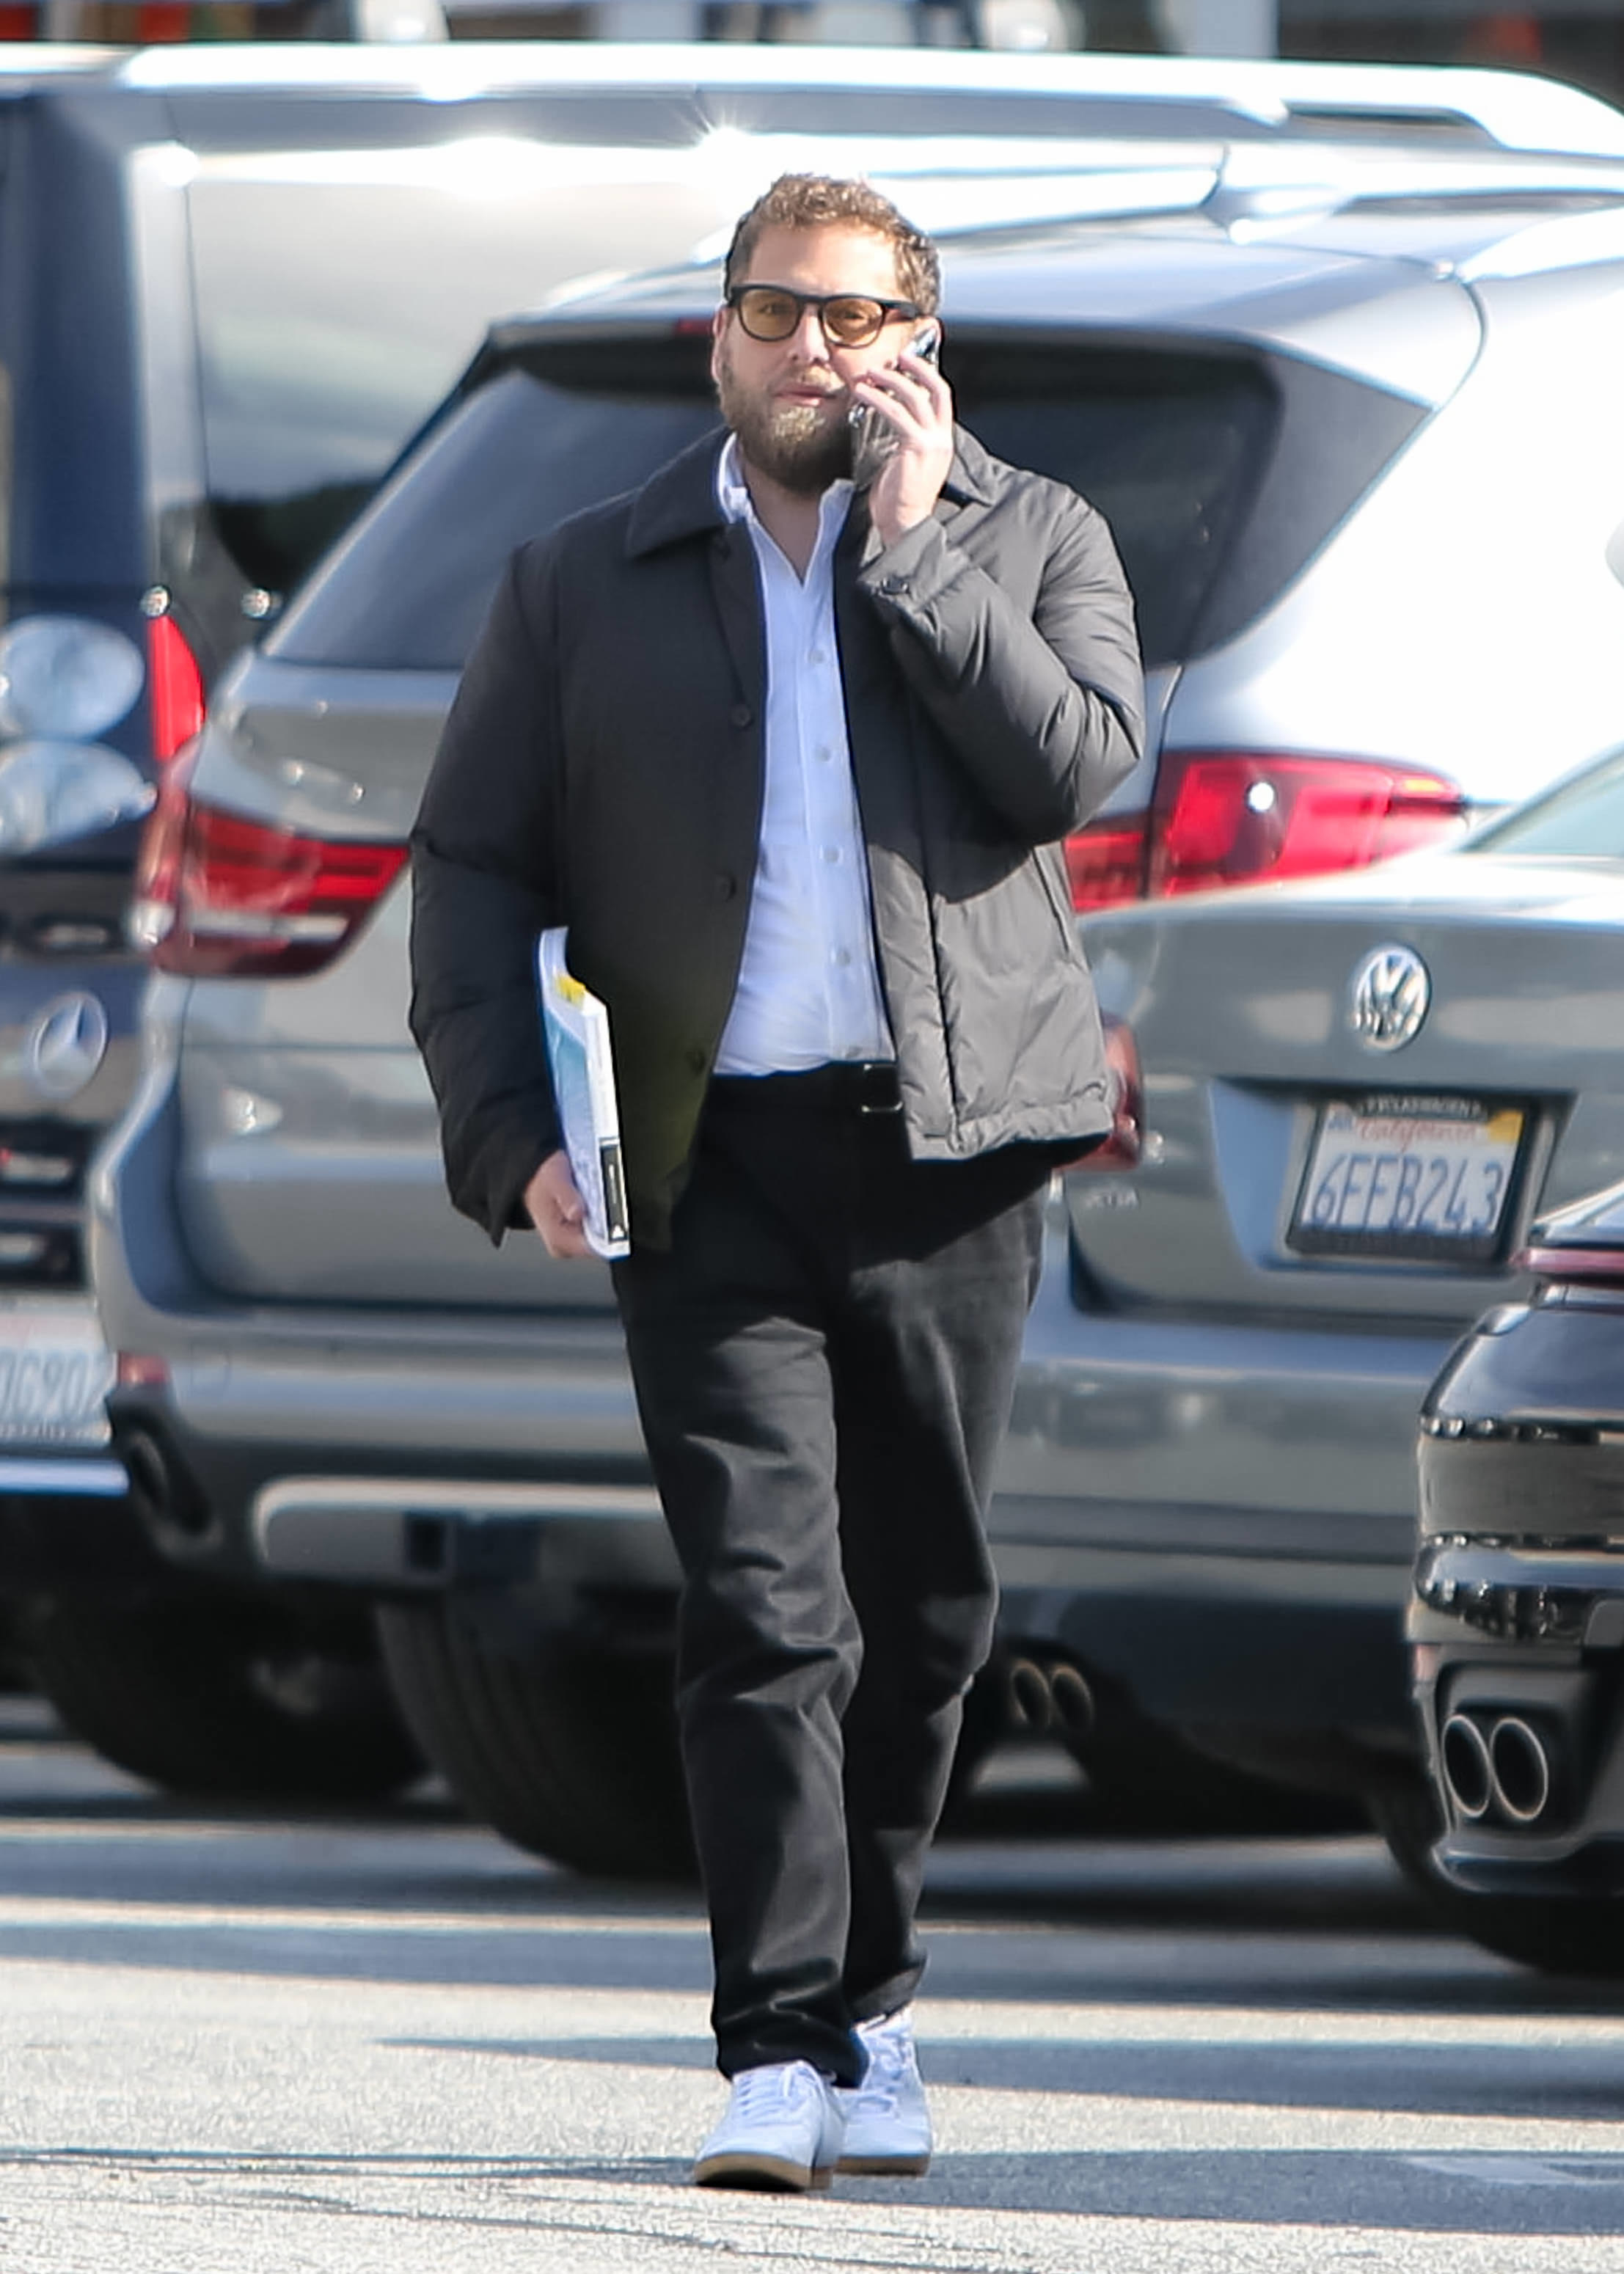 jonah on the phone in a parking lot